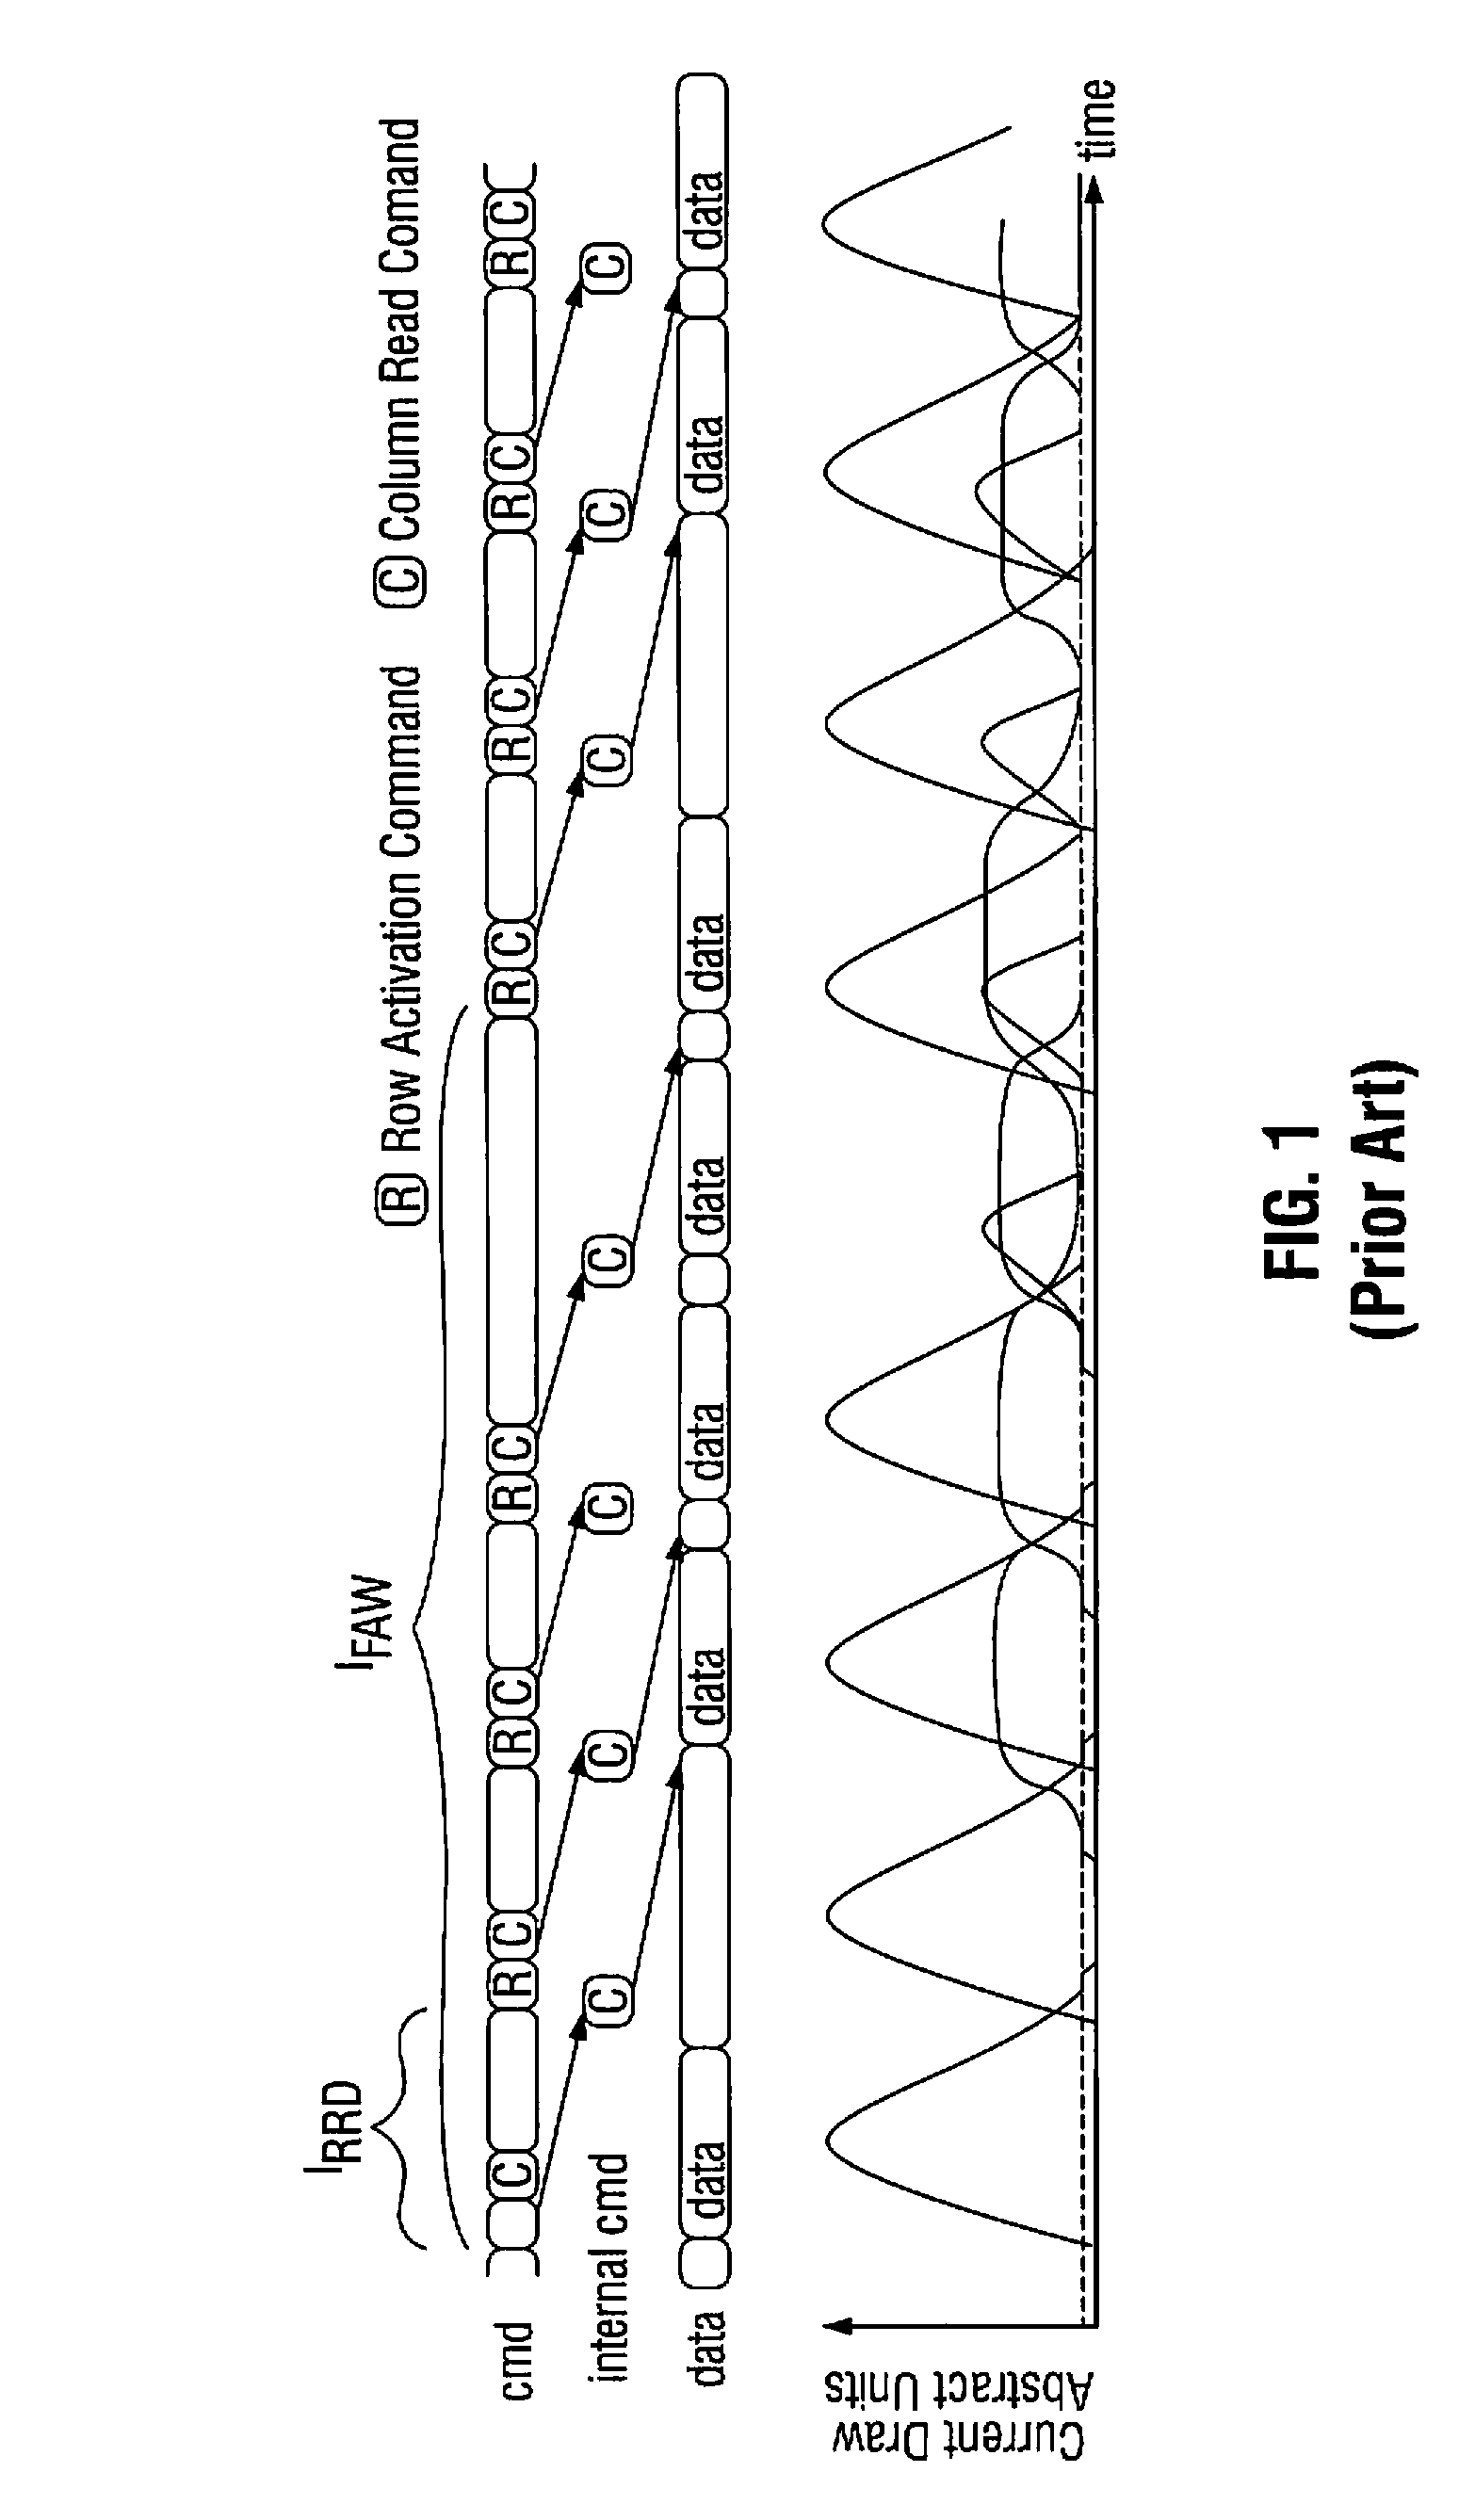 System and method for performing multi-rank command scheduling in DDR SDRAM memory systems